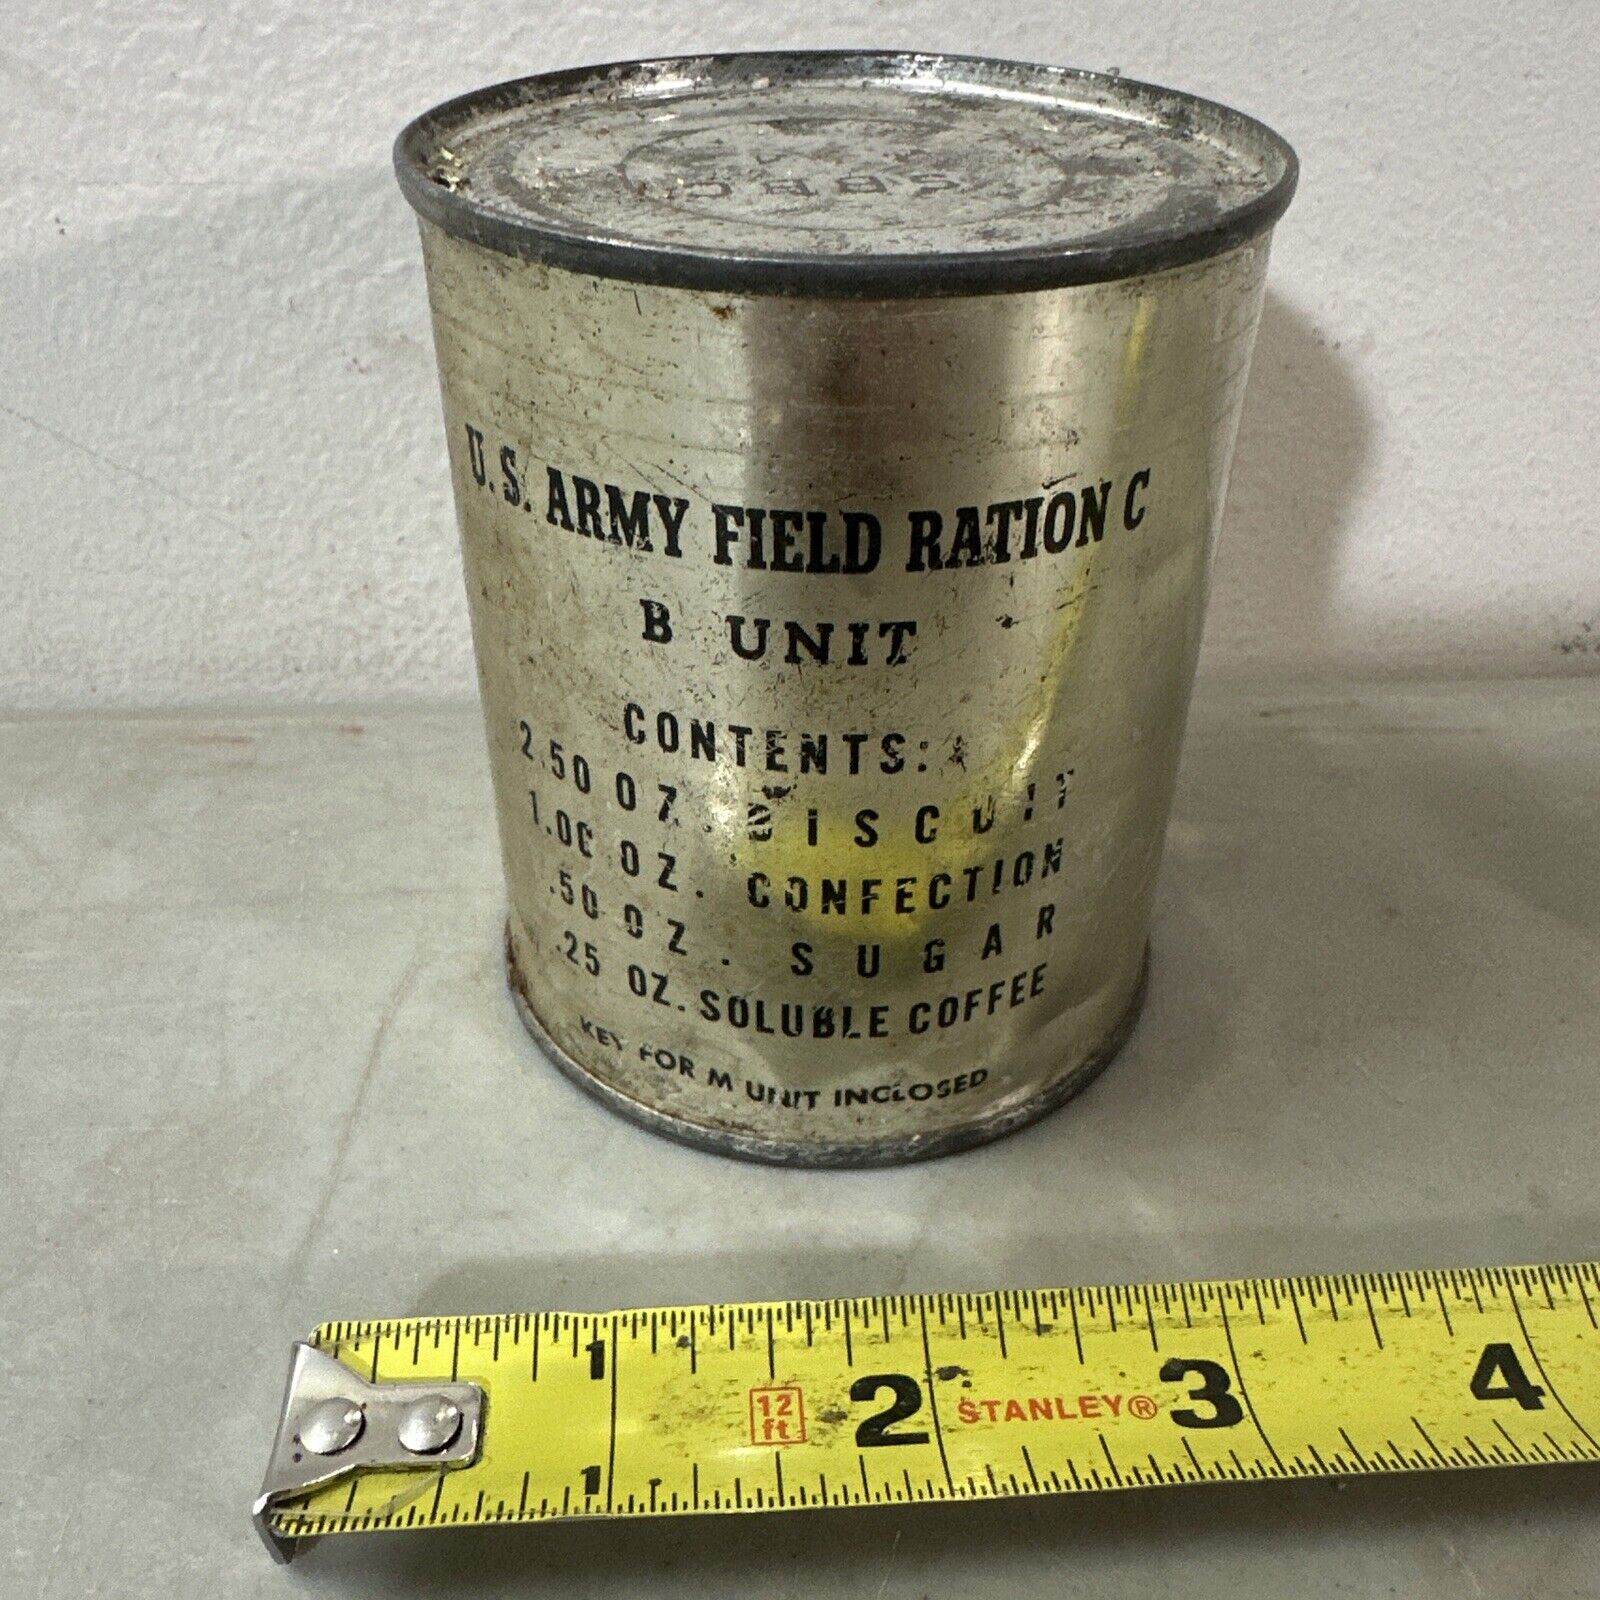 April 1942 WWII U.S. Army Field Ration C Biscuit Confection Coffee B Unit 4-42